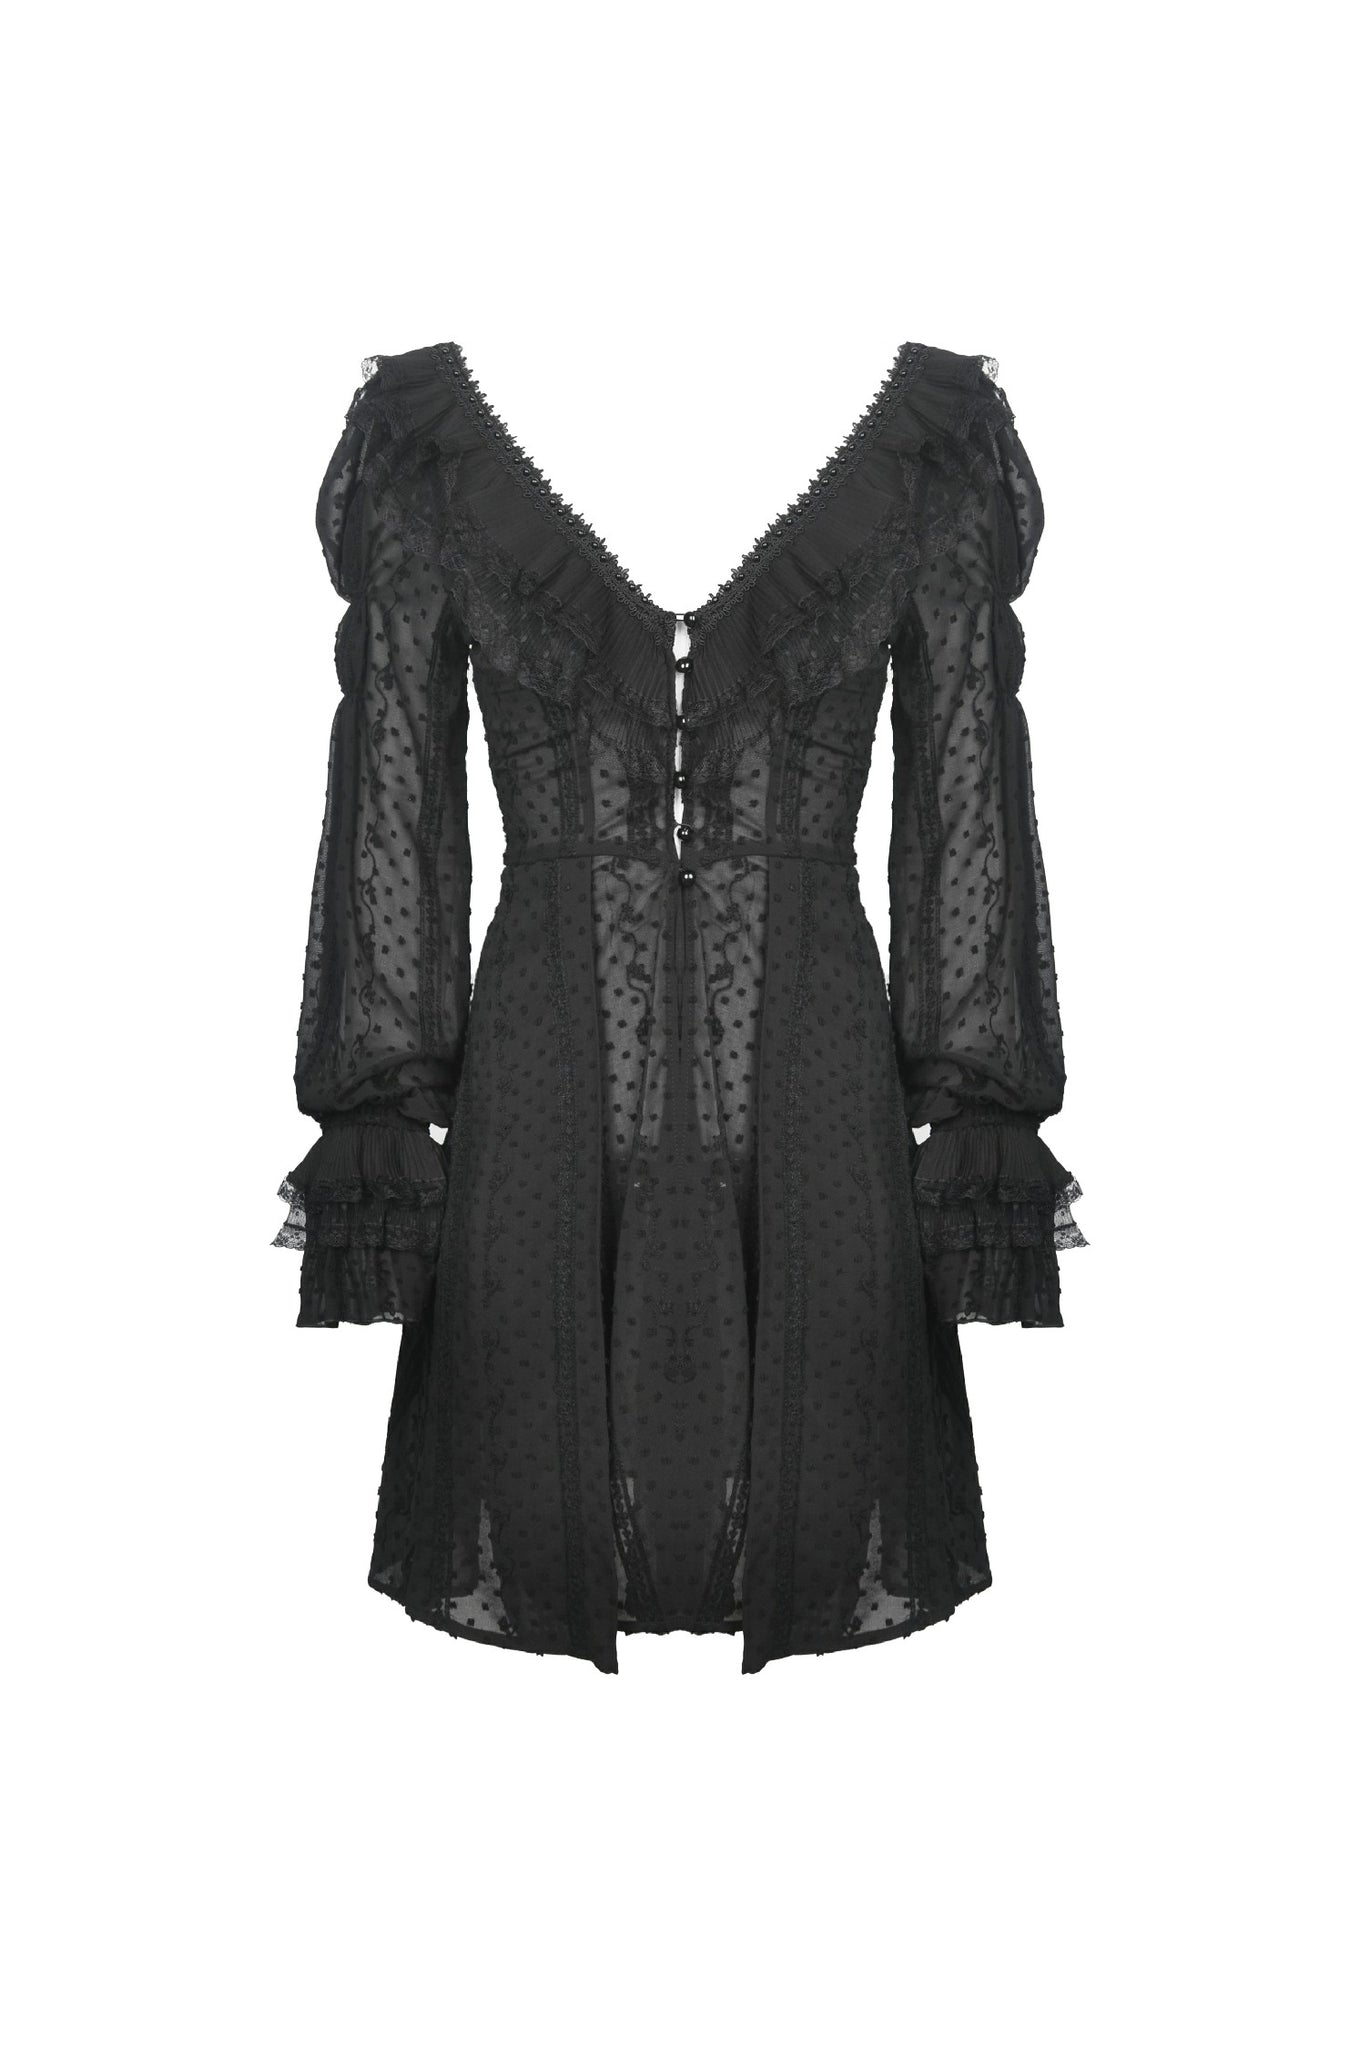 Howling Winds Frilly Cardigan by Dark In Love